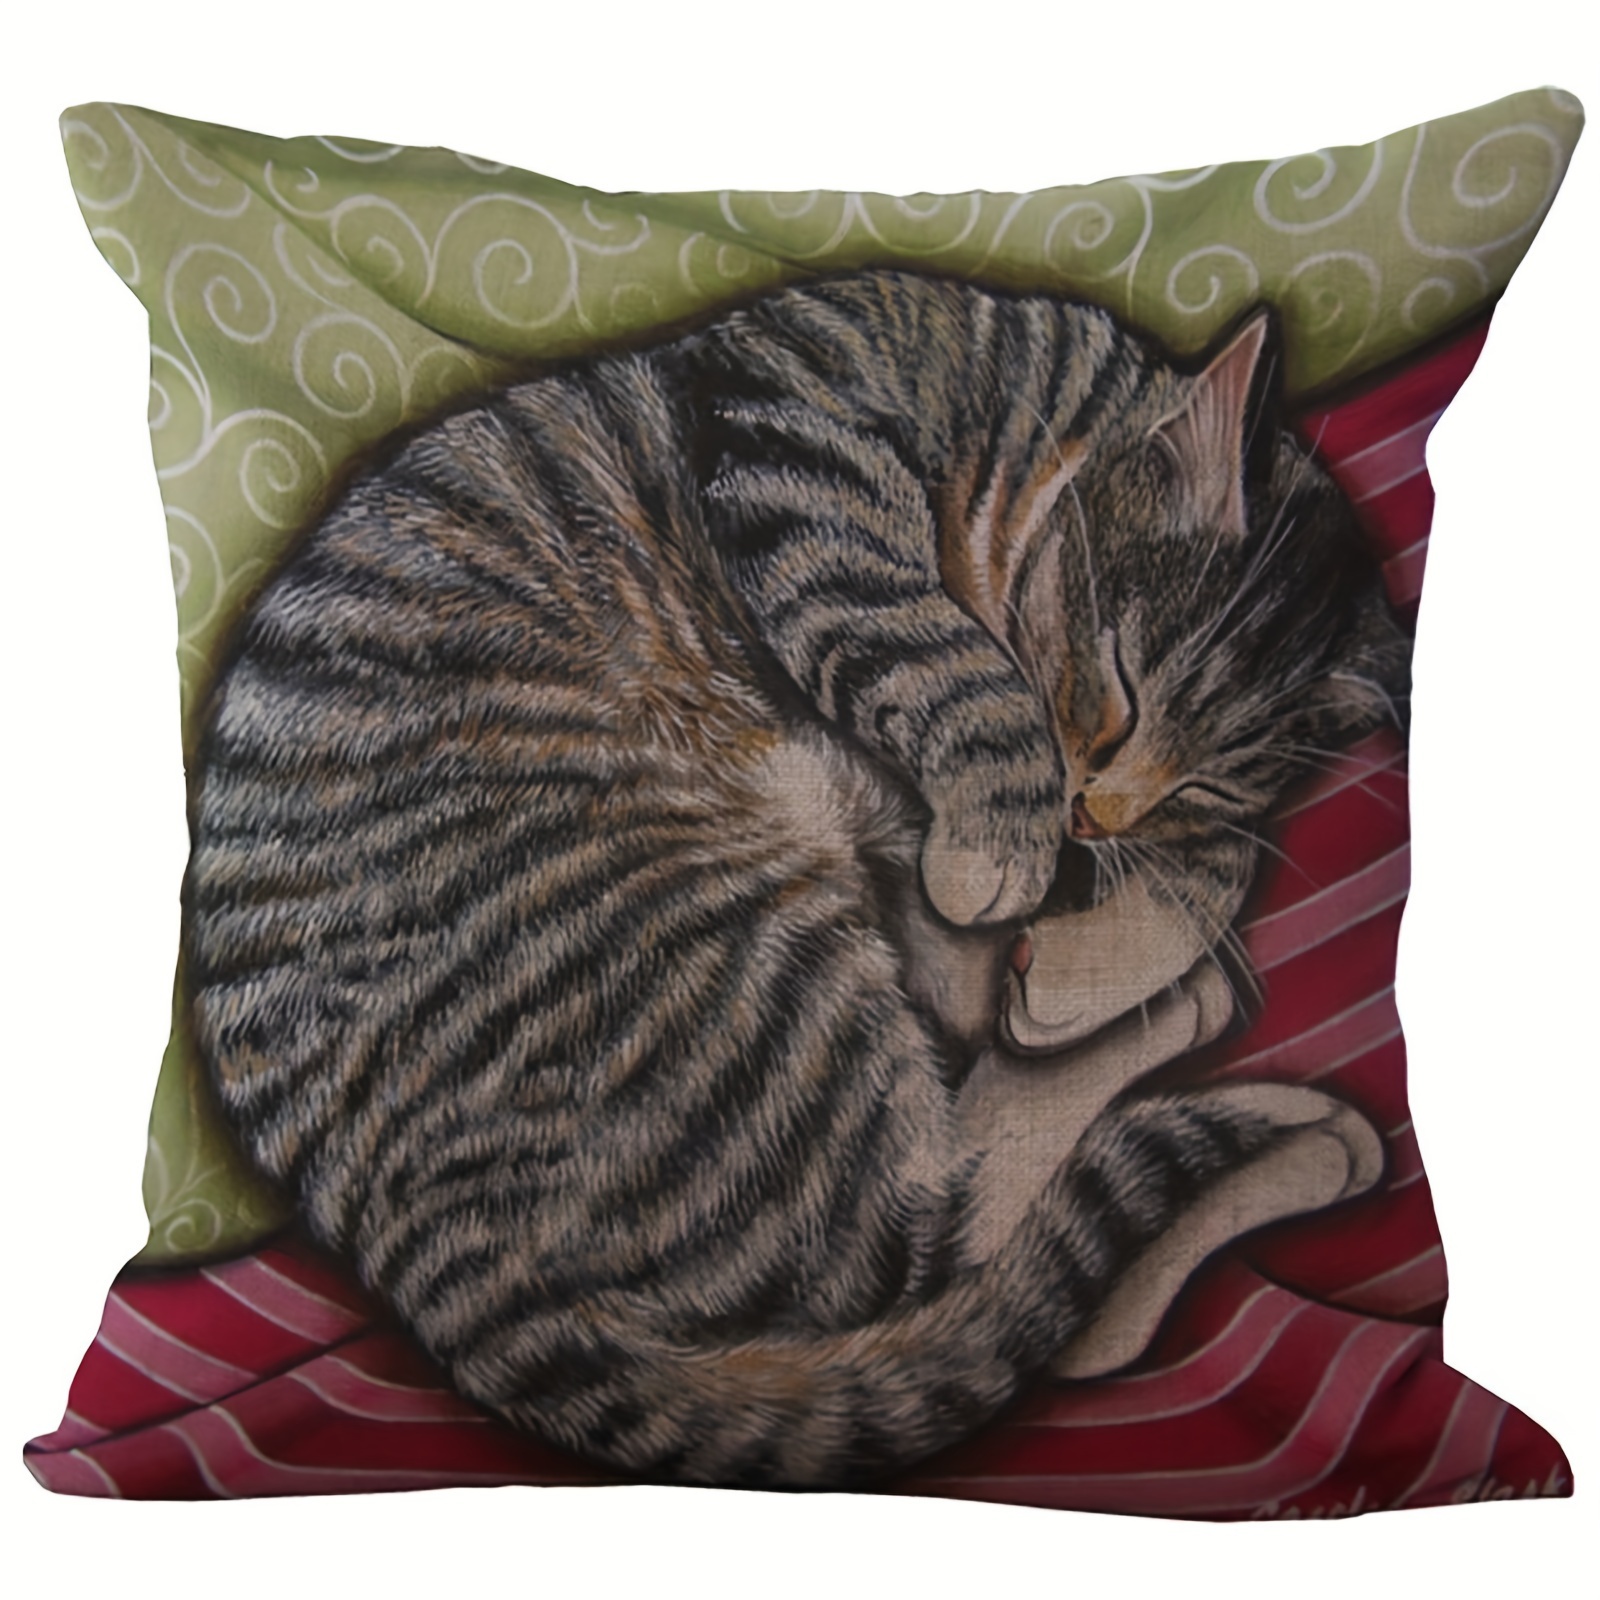 

1pc Cat Pattern Cushion Cover, Cotton Pillowslip Square Decorative Throw Pillow Case (cushion Is Not Included) 18x18inch